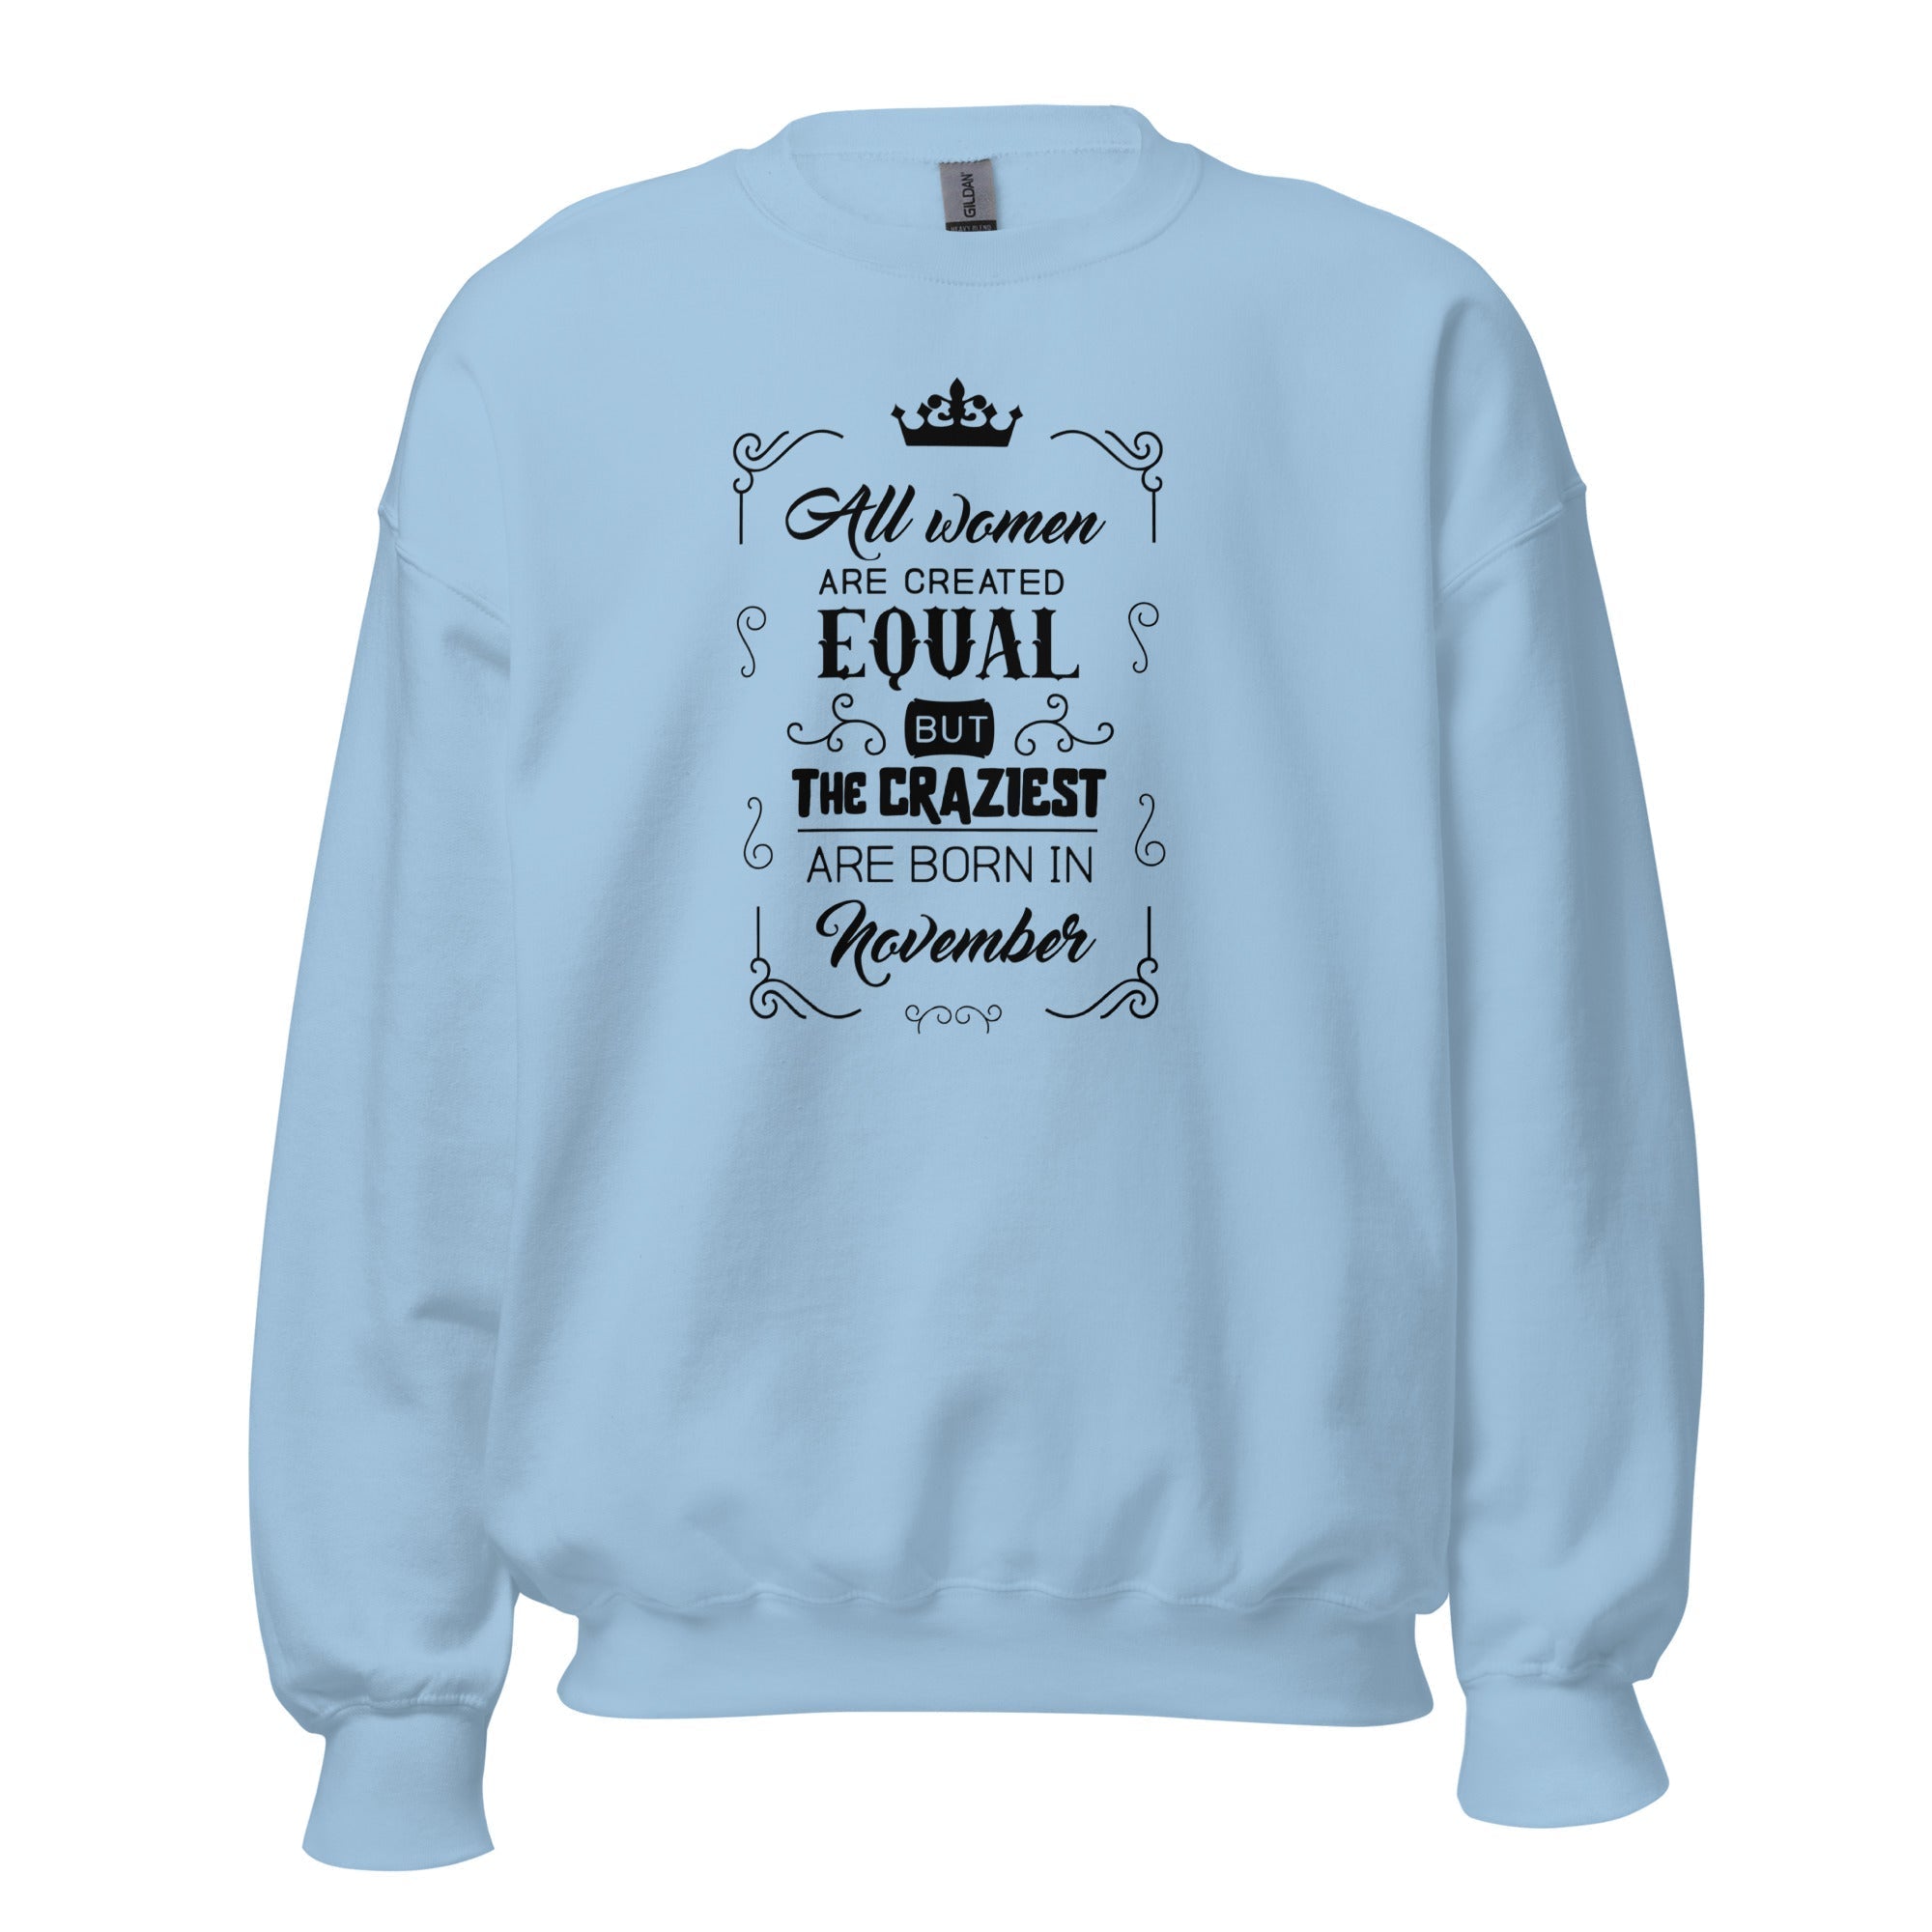 Women's Crew Neck Sweatshirt - All Women Are Created Equal But The Craziest Are Born in November - GRAPHIC T-SHIRTS